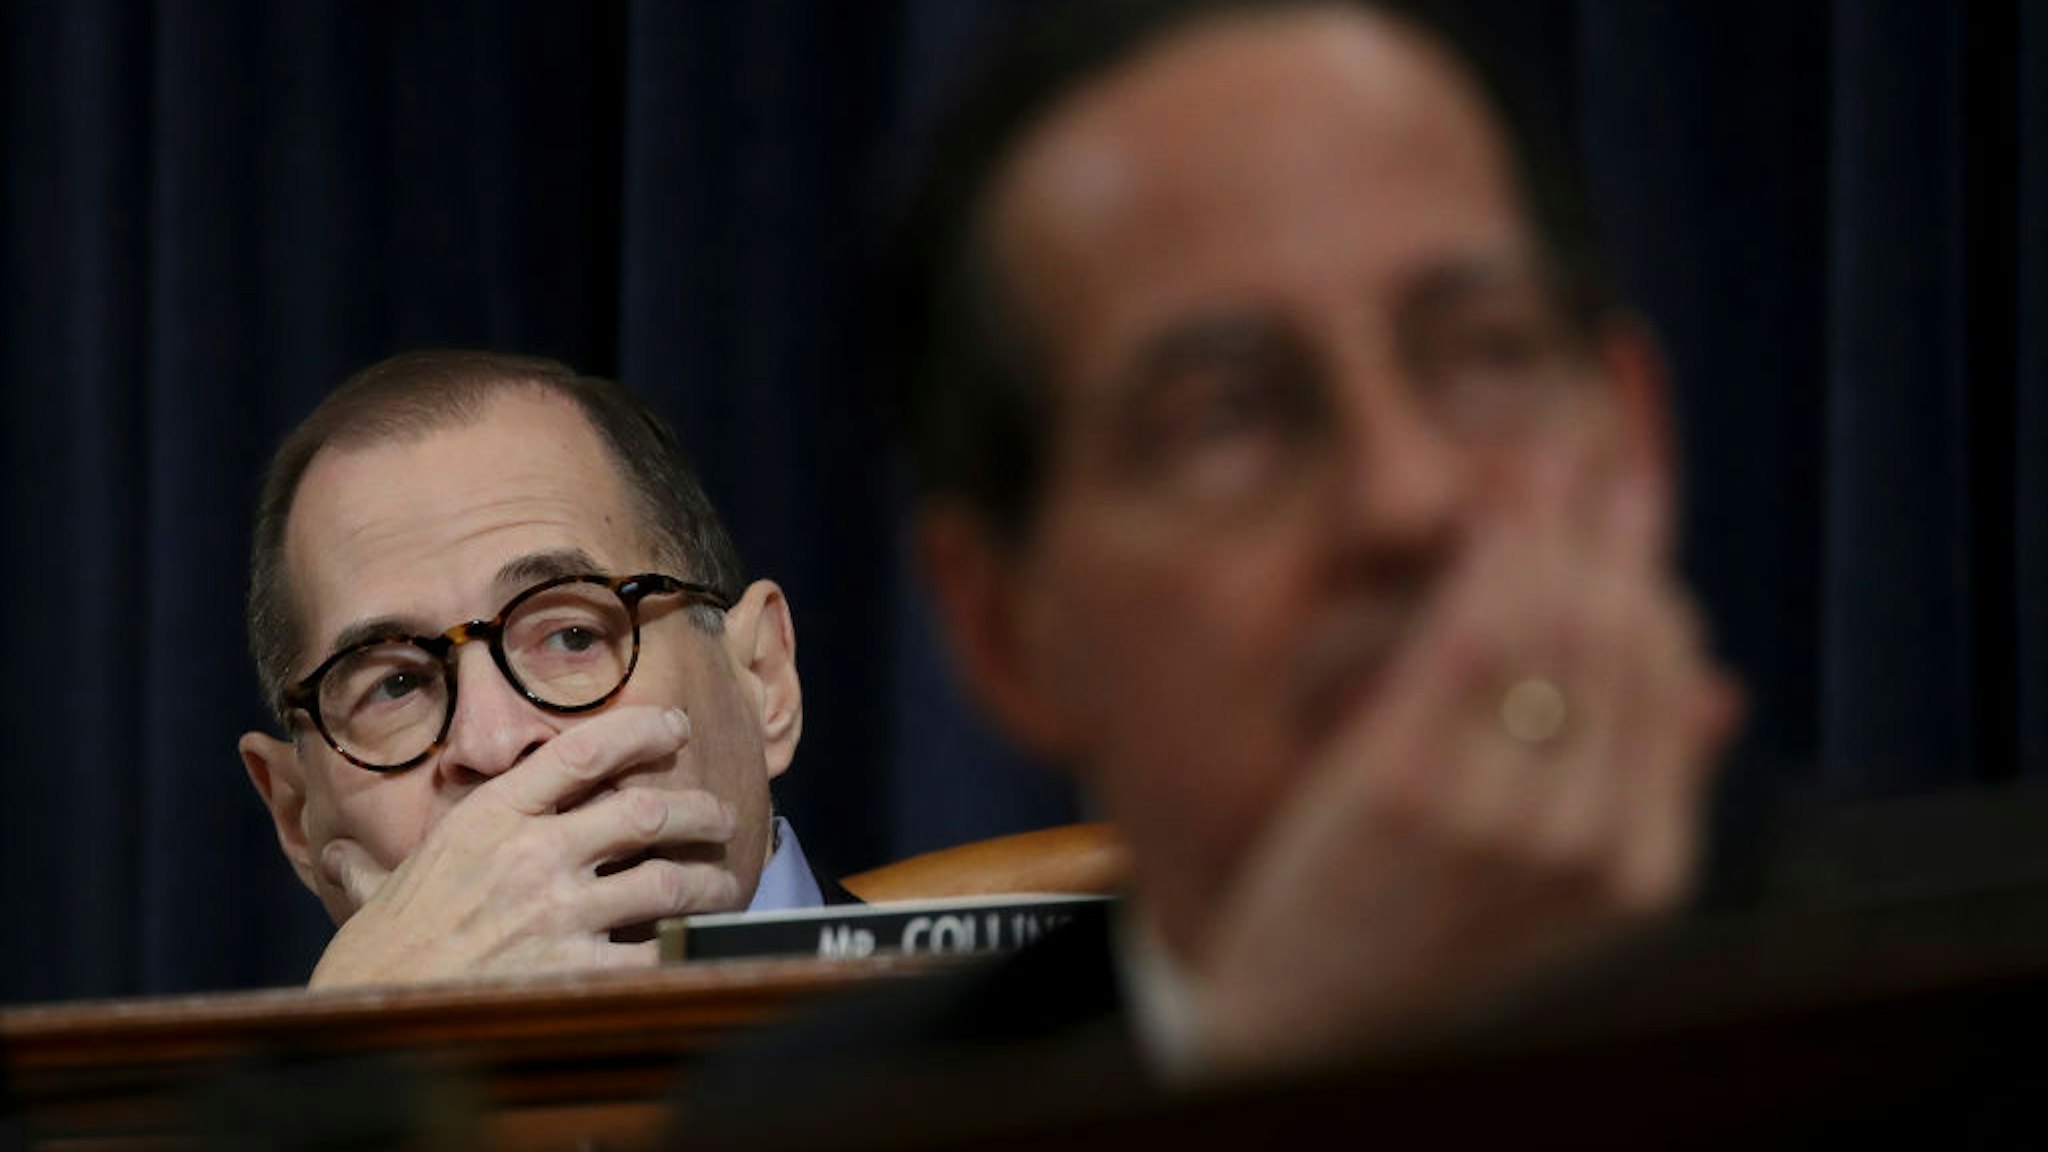 WASHINGTON, DC DECEMBER 11: (L-R) House Judiciary Committee Chairman Jerry Nadler (D-NY) and Rep. Jamie Raskin listen to opening statements during a committee markup hearing on the articles of impeachment against U.S. President Donald Trump in the Longworth House Office Building on Capitol Hill December 11, 2019 in Washington, DC. The articles of impeachment charge Trump with abuse of power and obstruction of Congress. House Democrats claim that Trump posed a 'clear and present danger' to national security and the 2020 election in his dealings with Ukraine over the past year. (Photo by Drew Angerer/GettyImages)